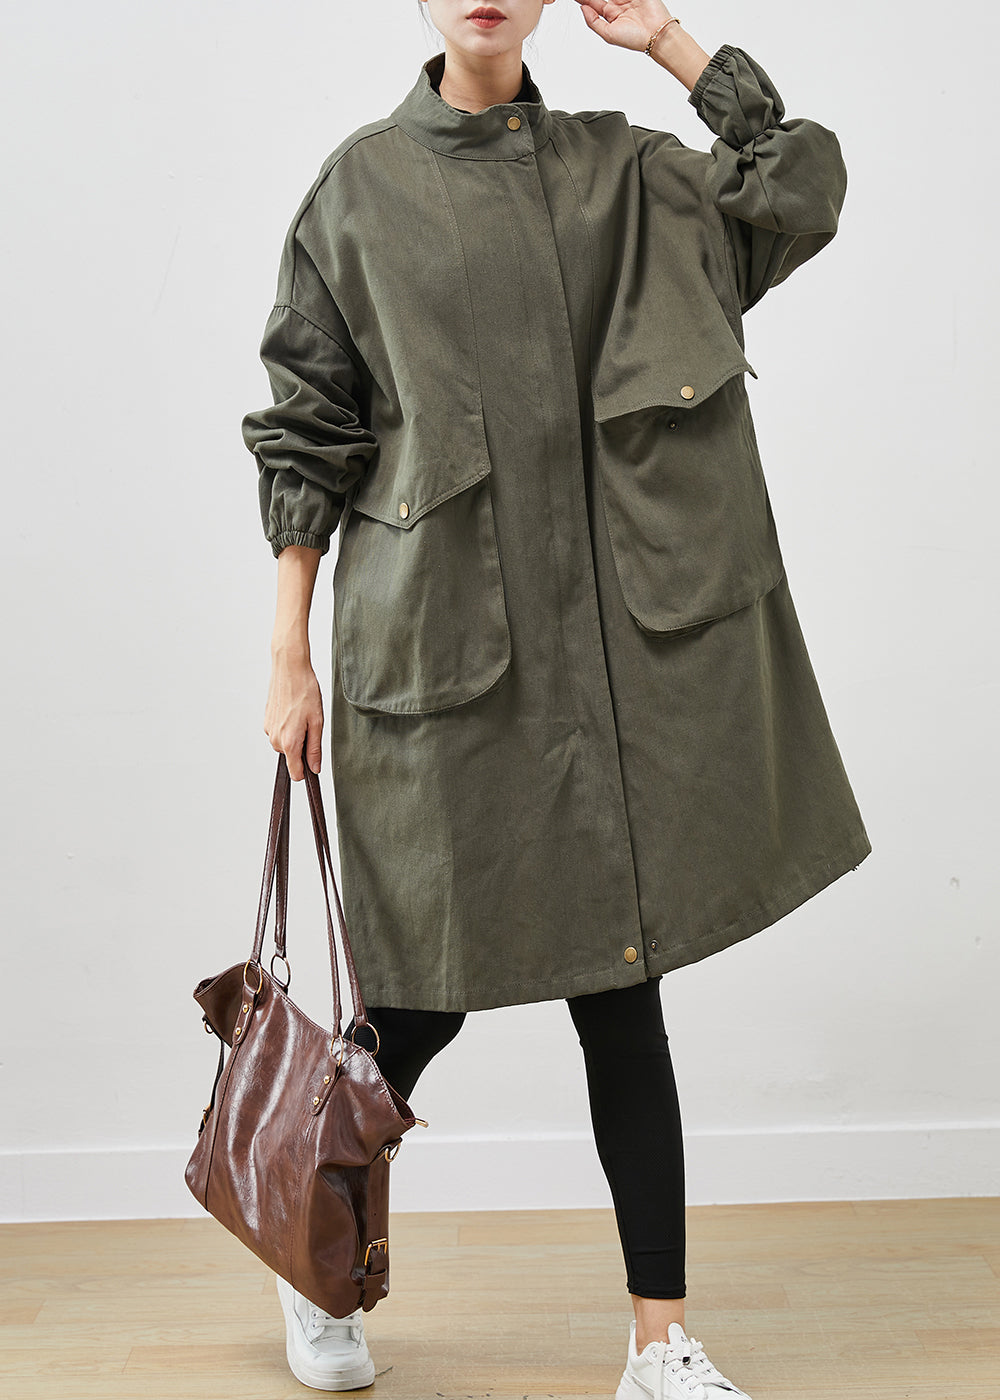 Classy Army Green Oversized Pockets Cotton Coat Outwear Spring